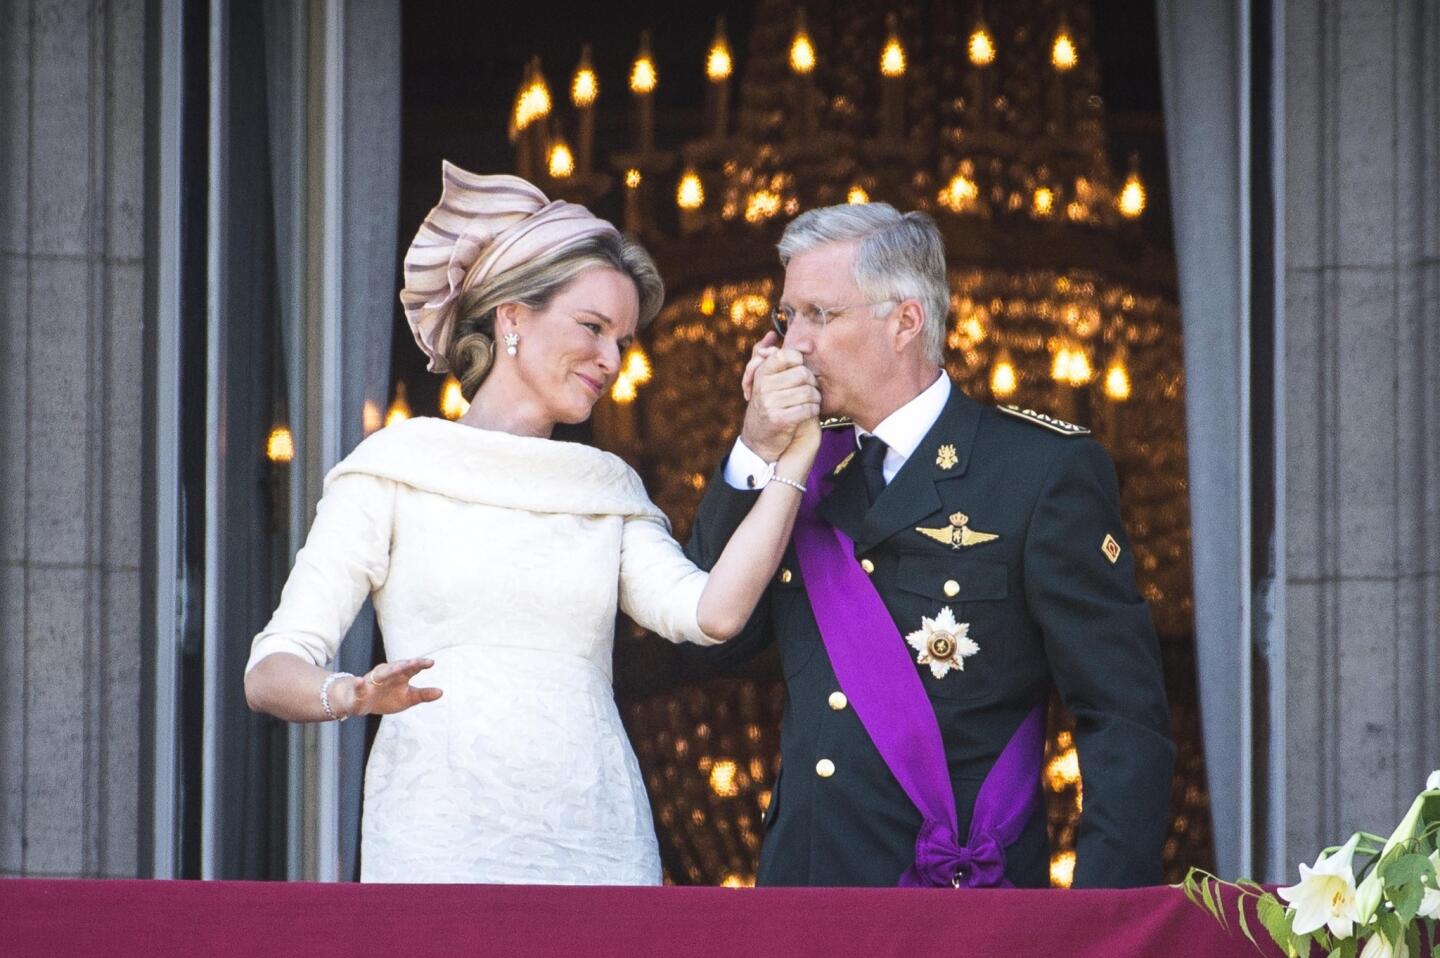 King Philippe of Belgium kisses the hand of his wife, Queen Mathilde, on the balcony of the royal palace in Brussels.